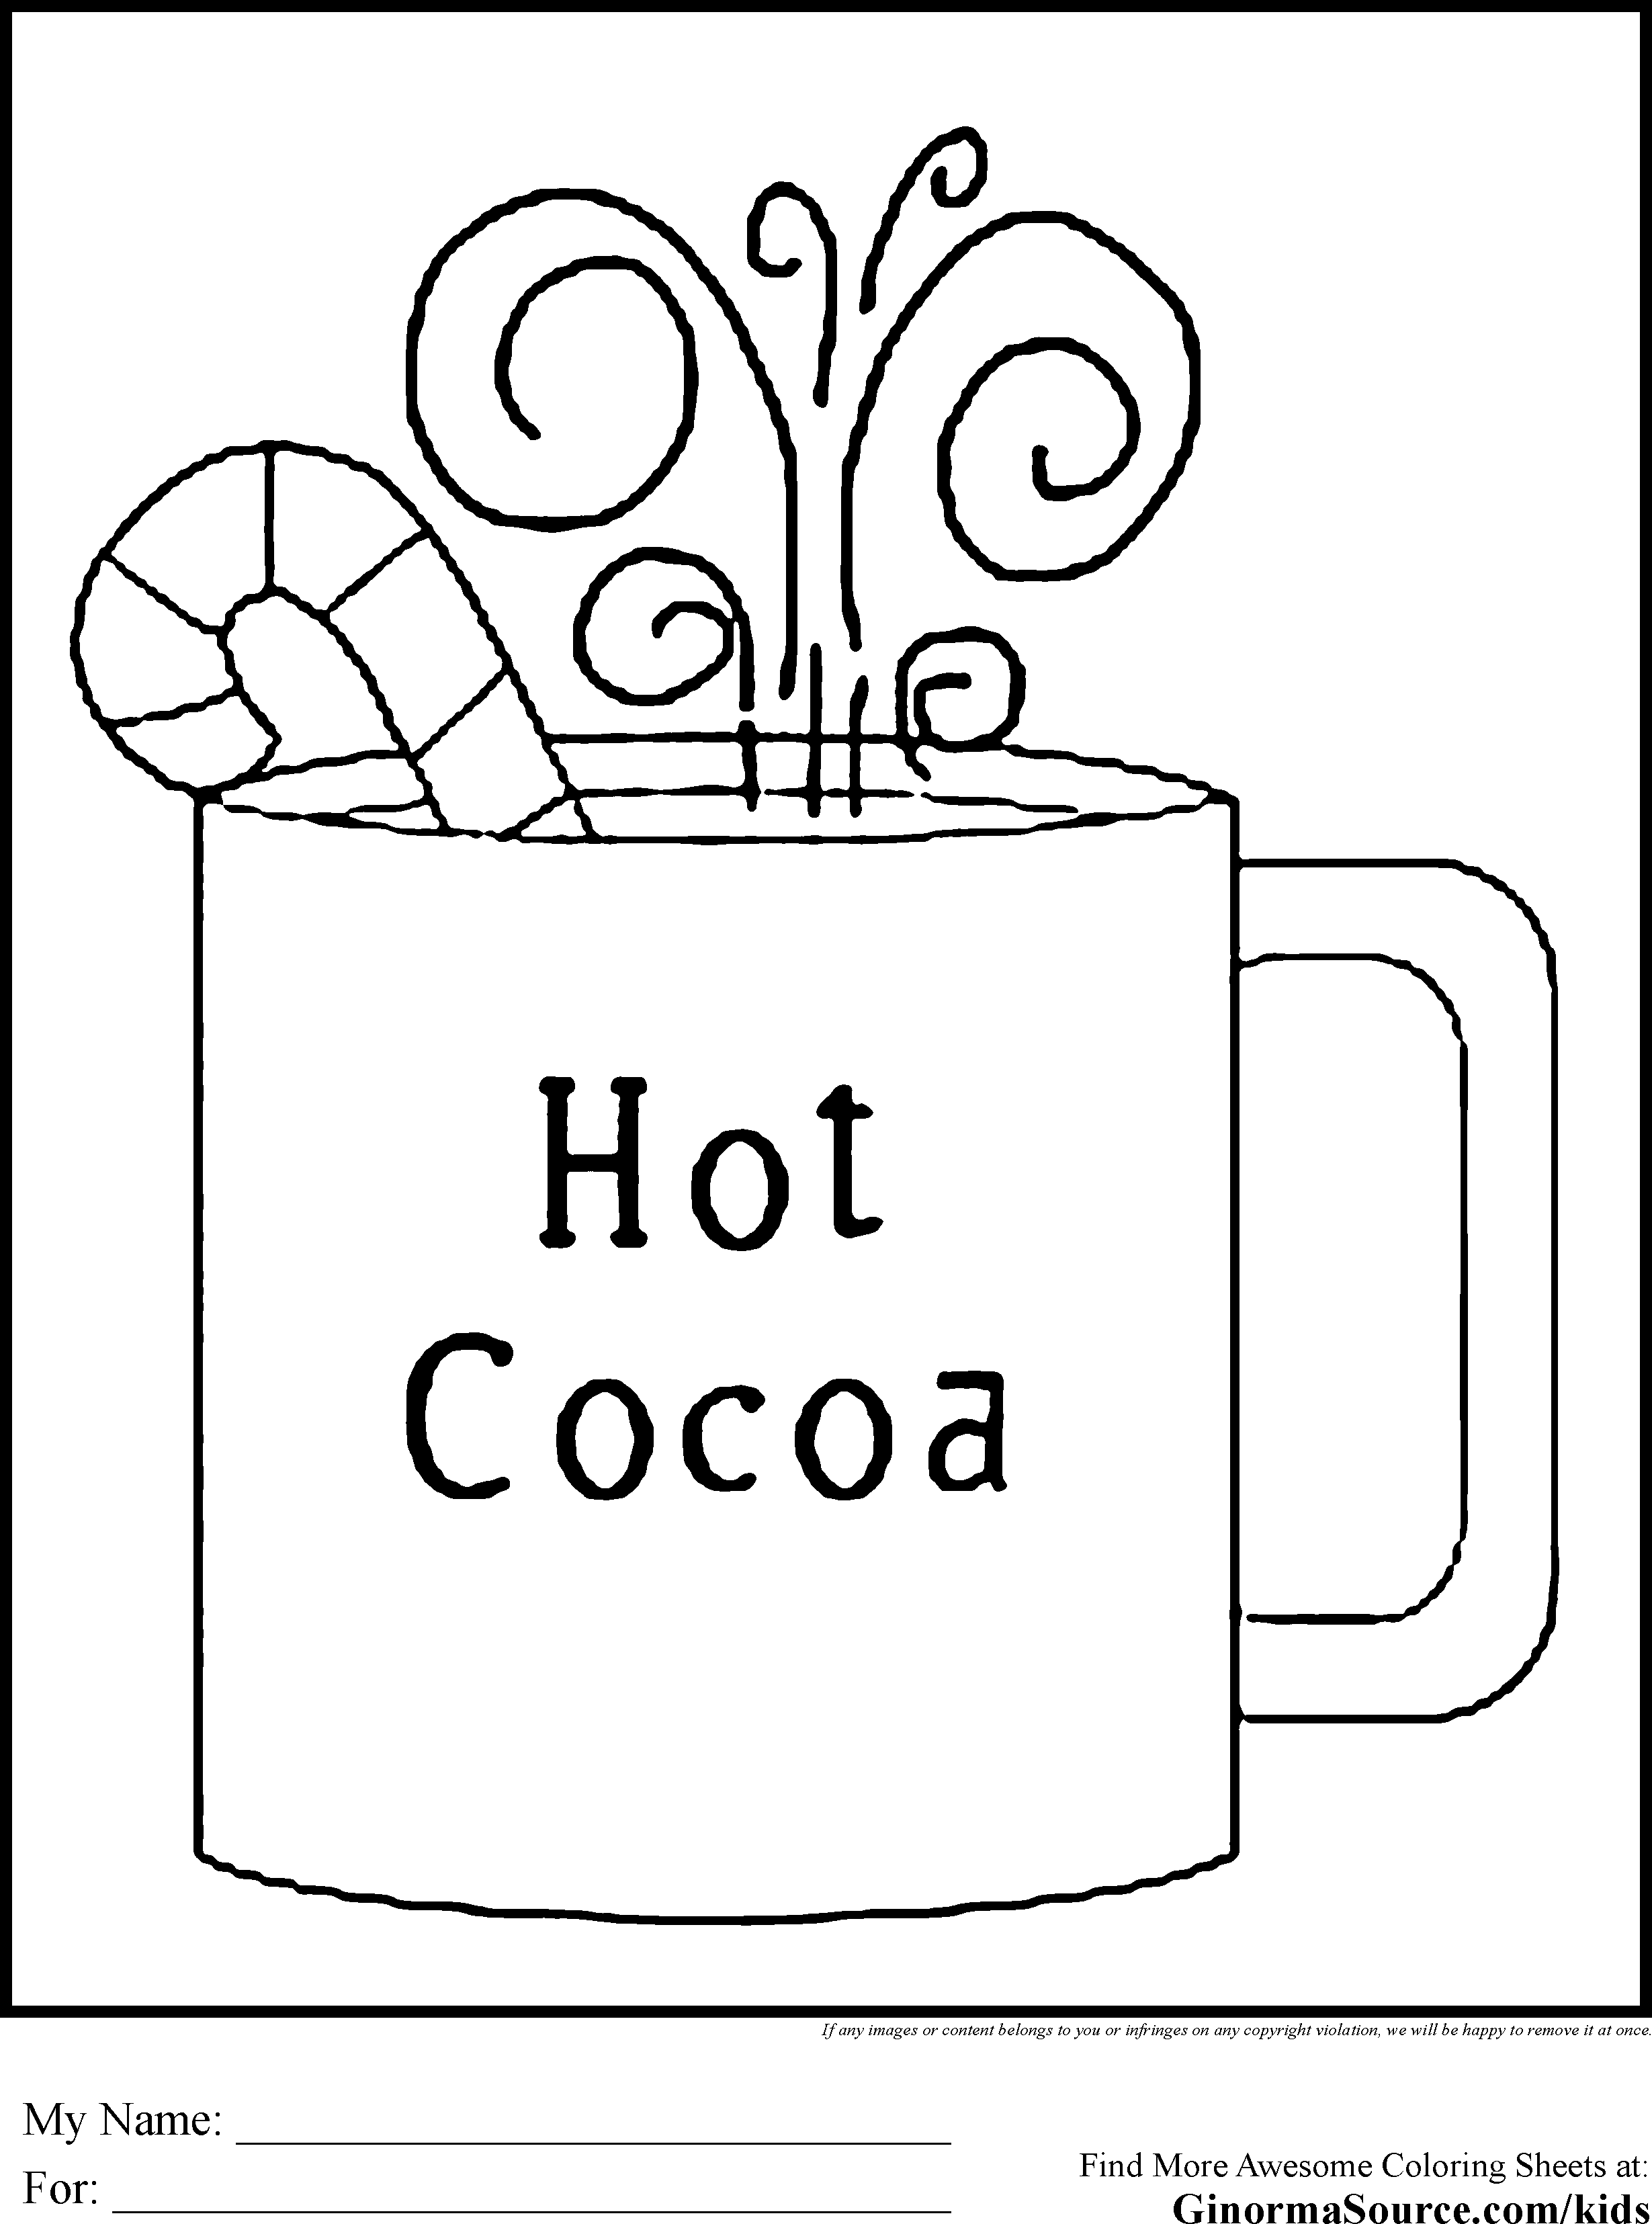 free-winter-colouring-pages-pdf-winter-season-coloring-pages-coloring